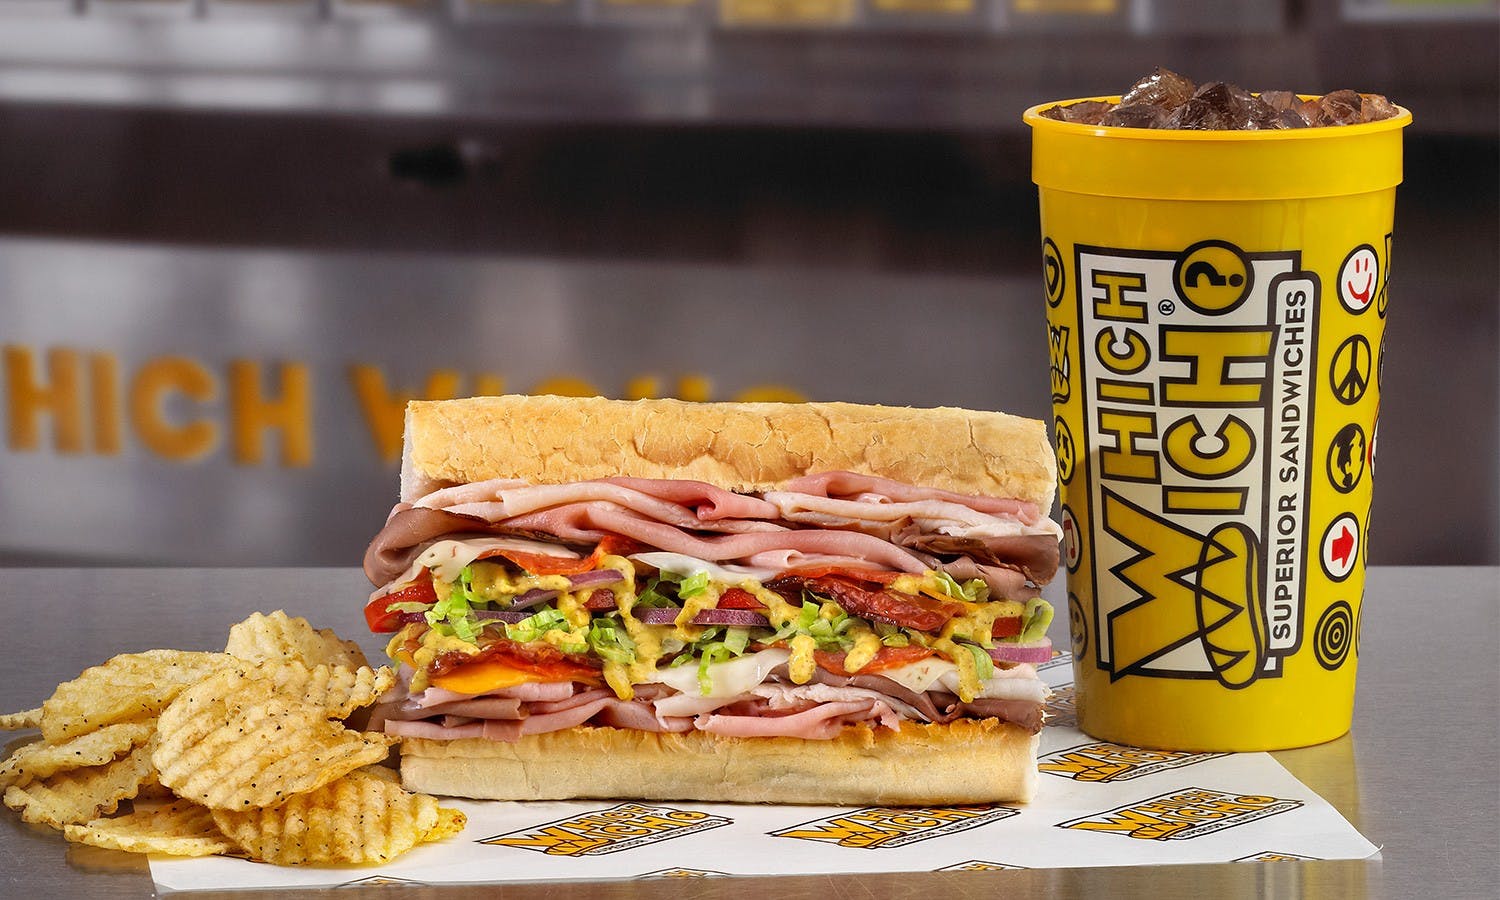 Which Wich - S Dubuque St. in Iowa City - Highlight